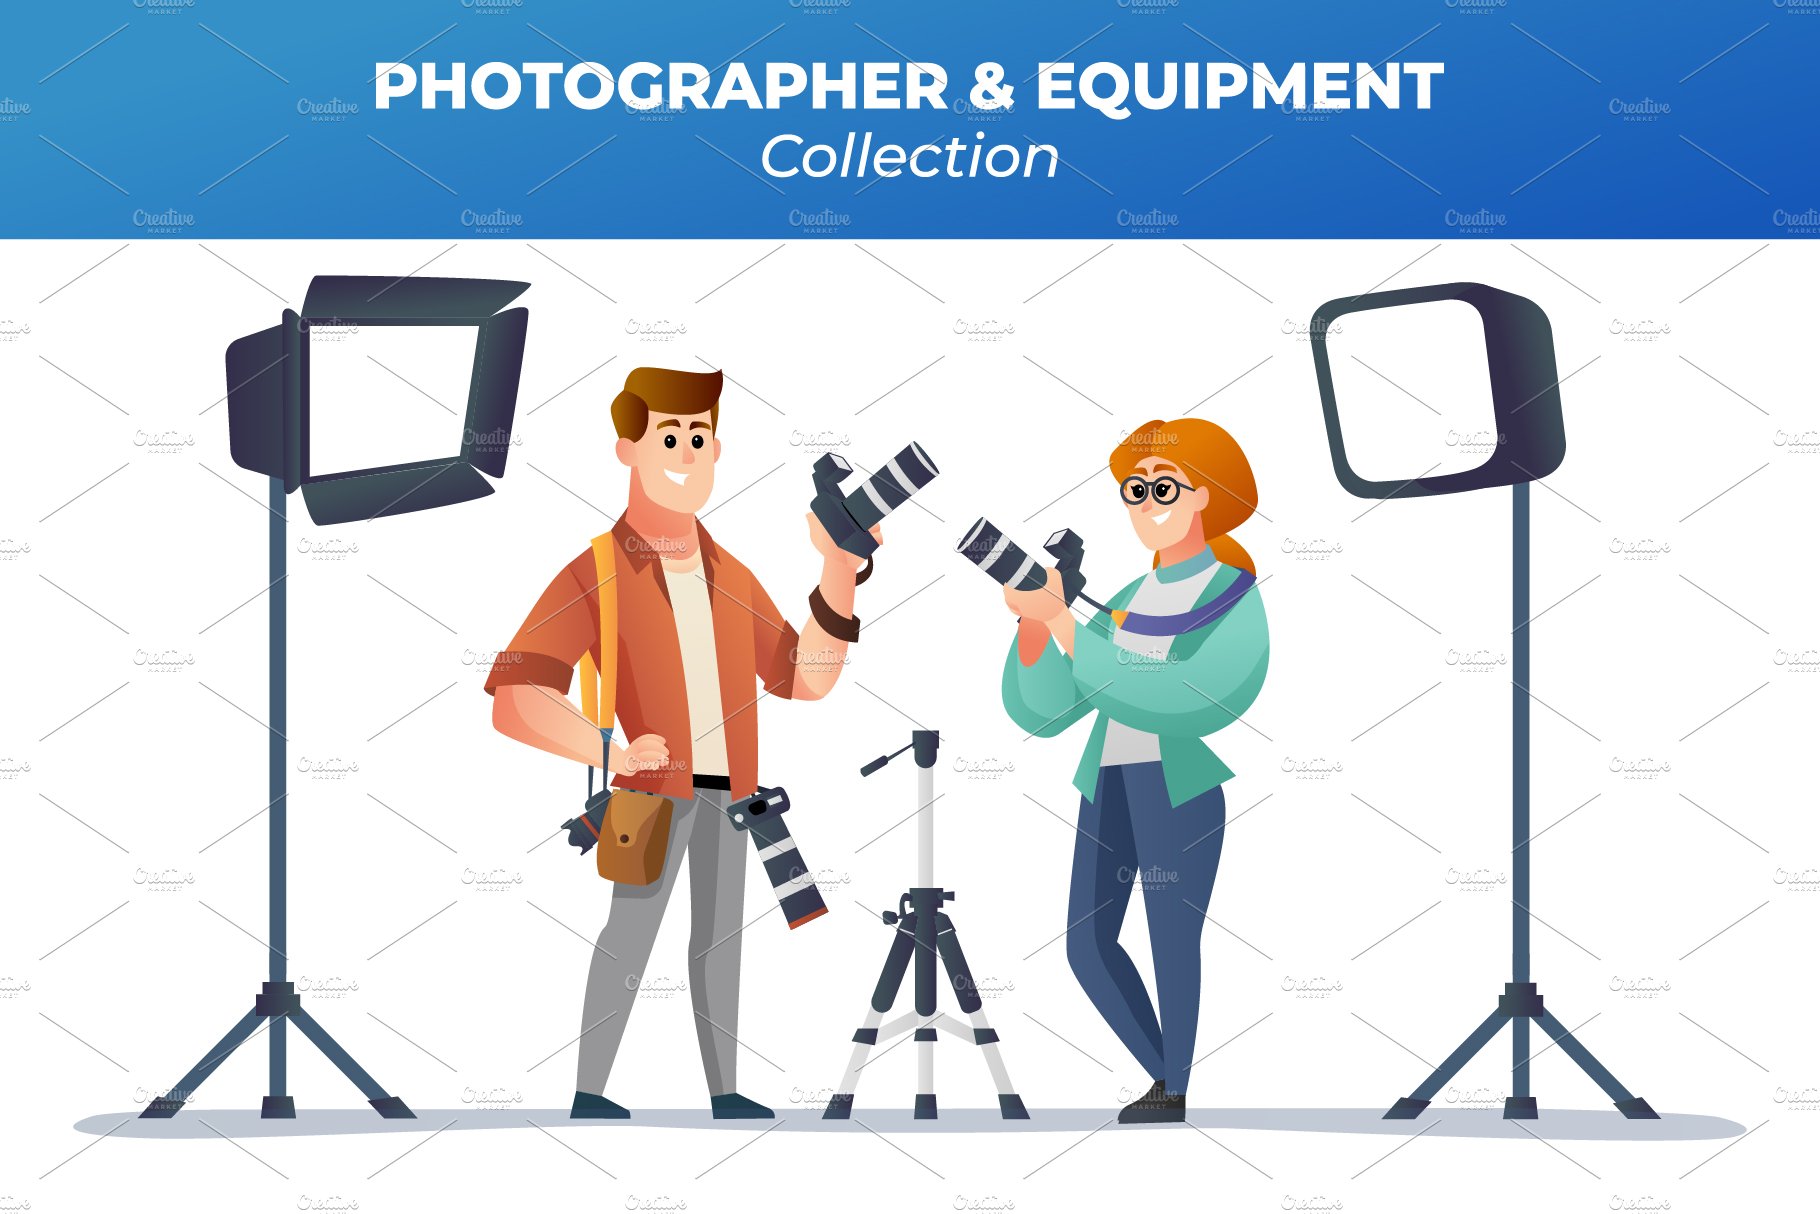 Photographer and Equipment Set cover image.